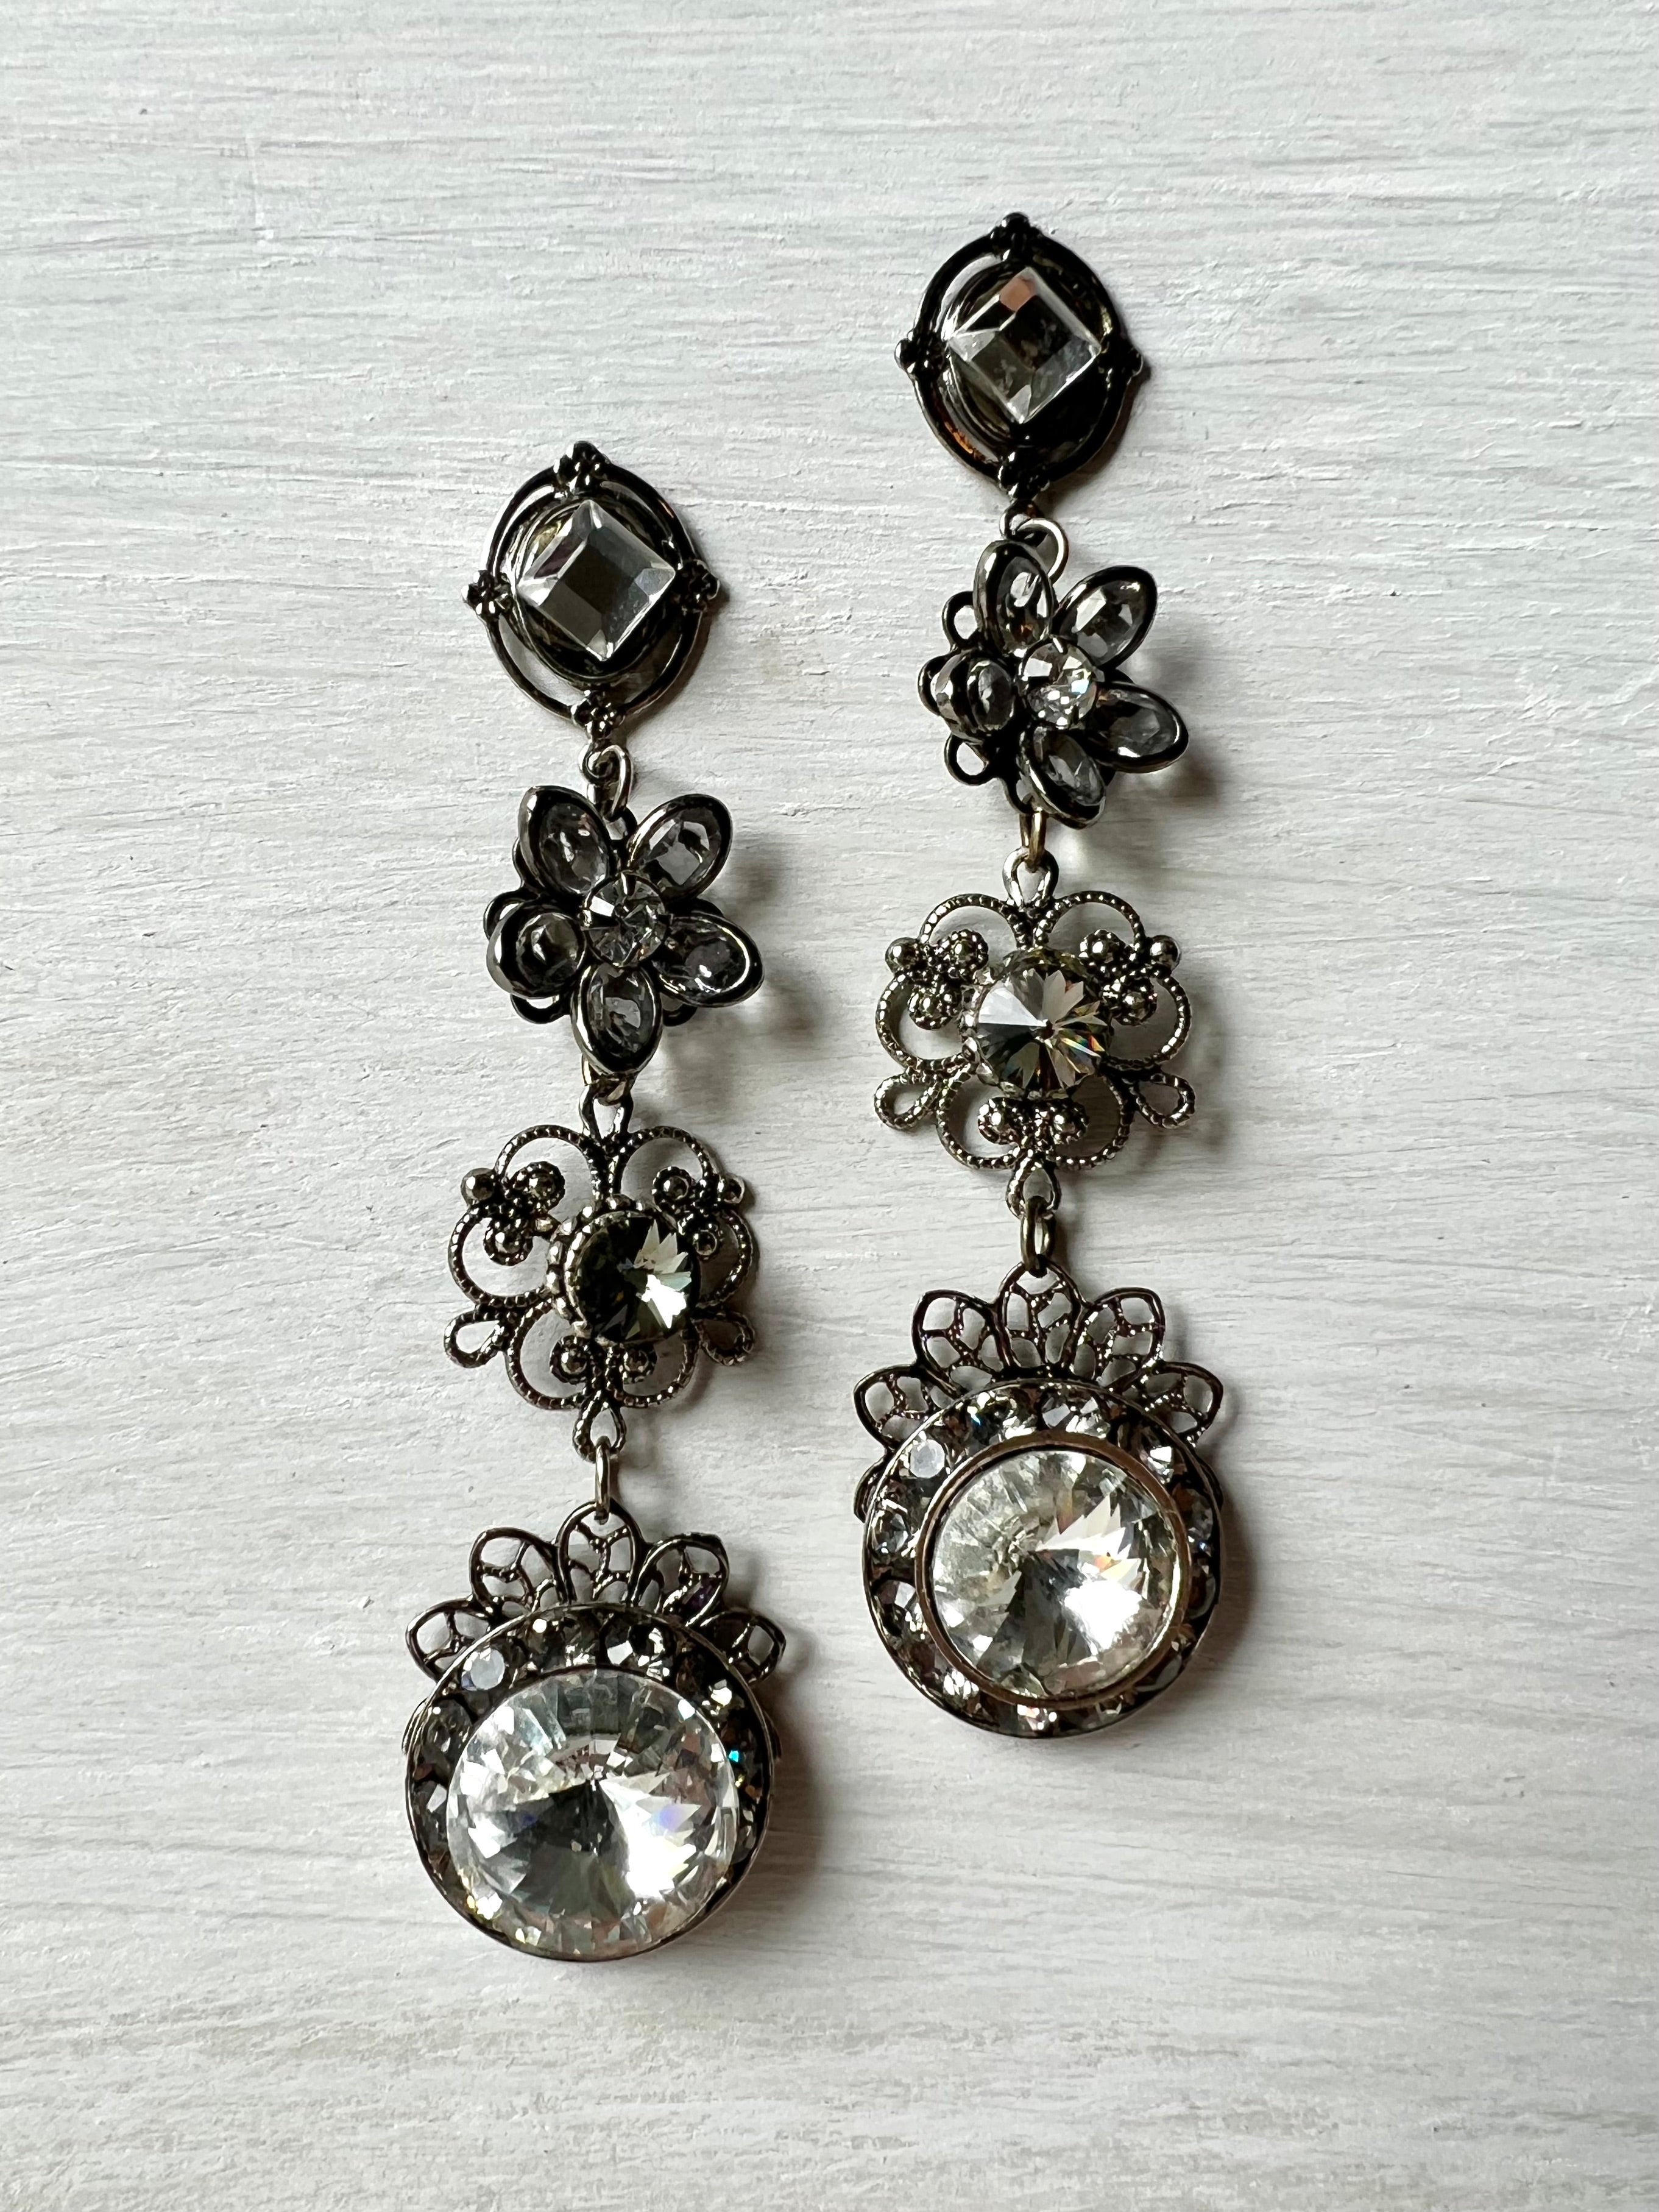 RGS-E007: Handcrafted Crystal Earrings